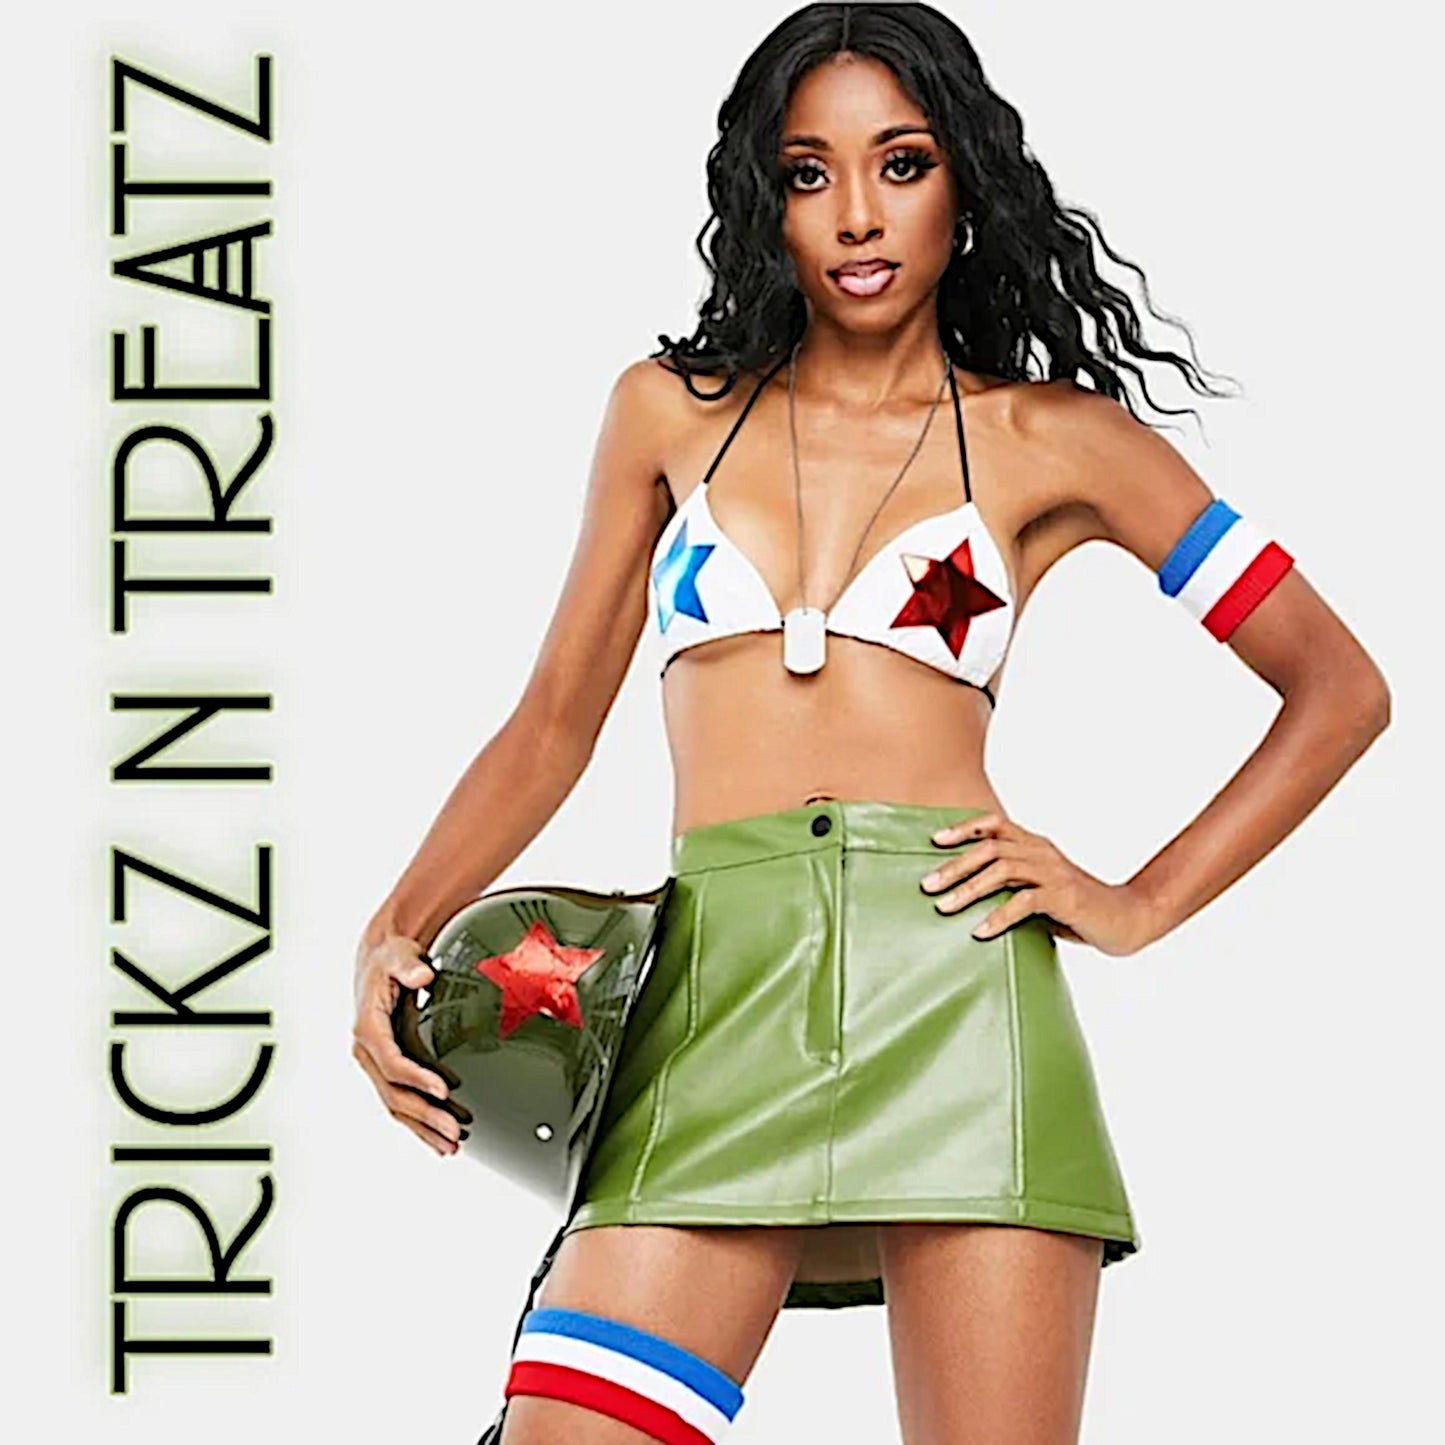 Tank Girl Costume | Faux Leather Star Top Arm & Leg Bands Dog Tags & Hard Hat - Trickz N Treatz - Costumes